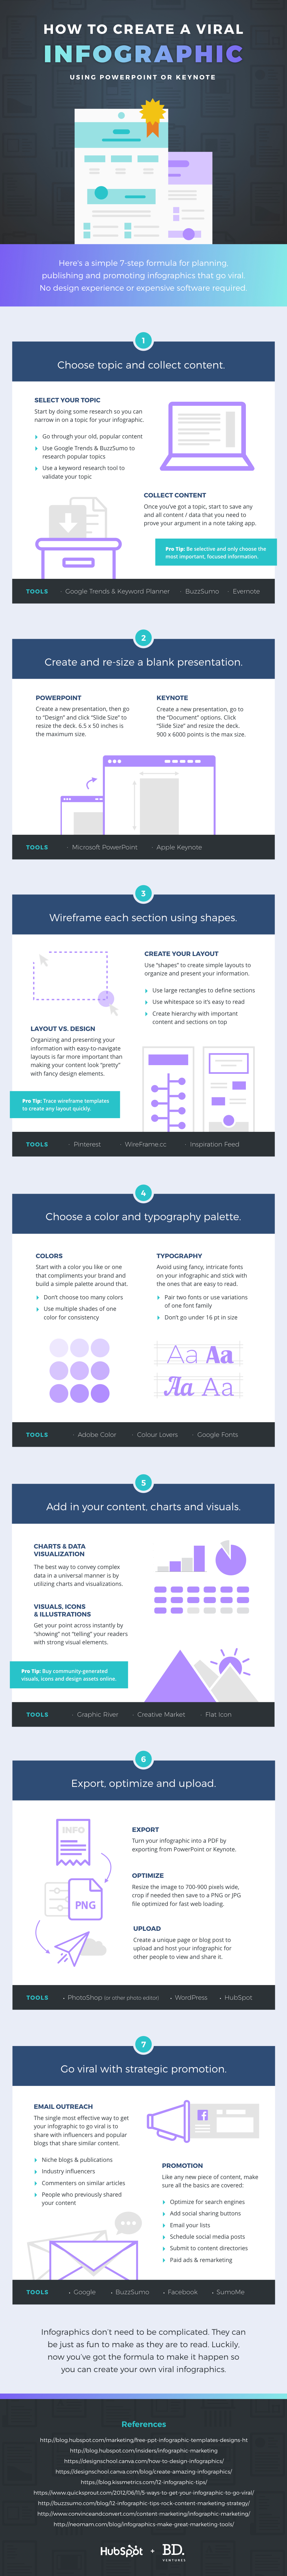 How to Create Viral Infographics Using PowerPoint or Keynote #infographic